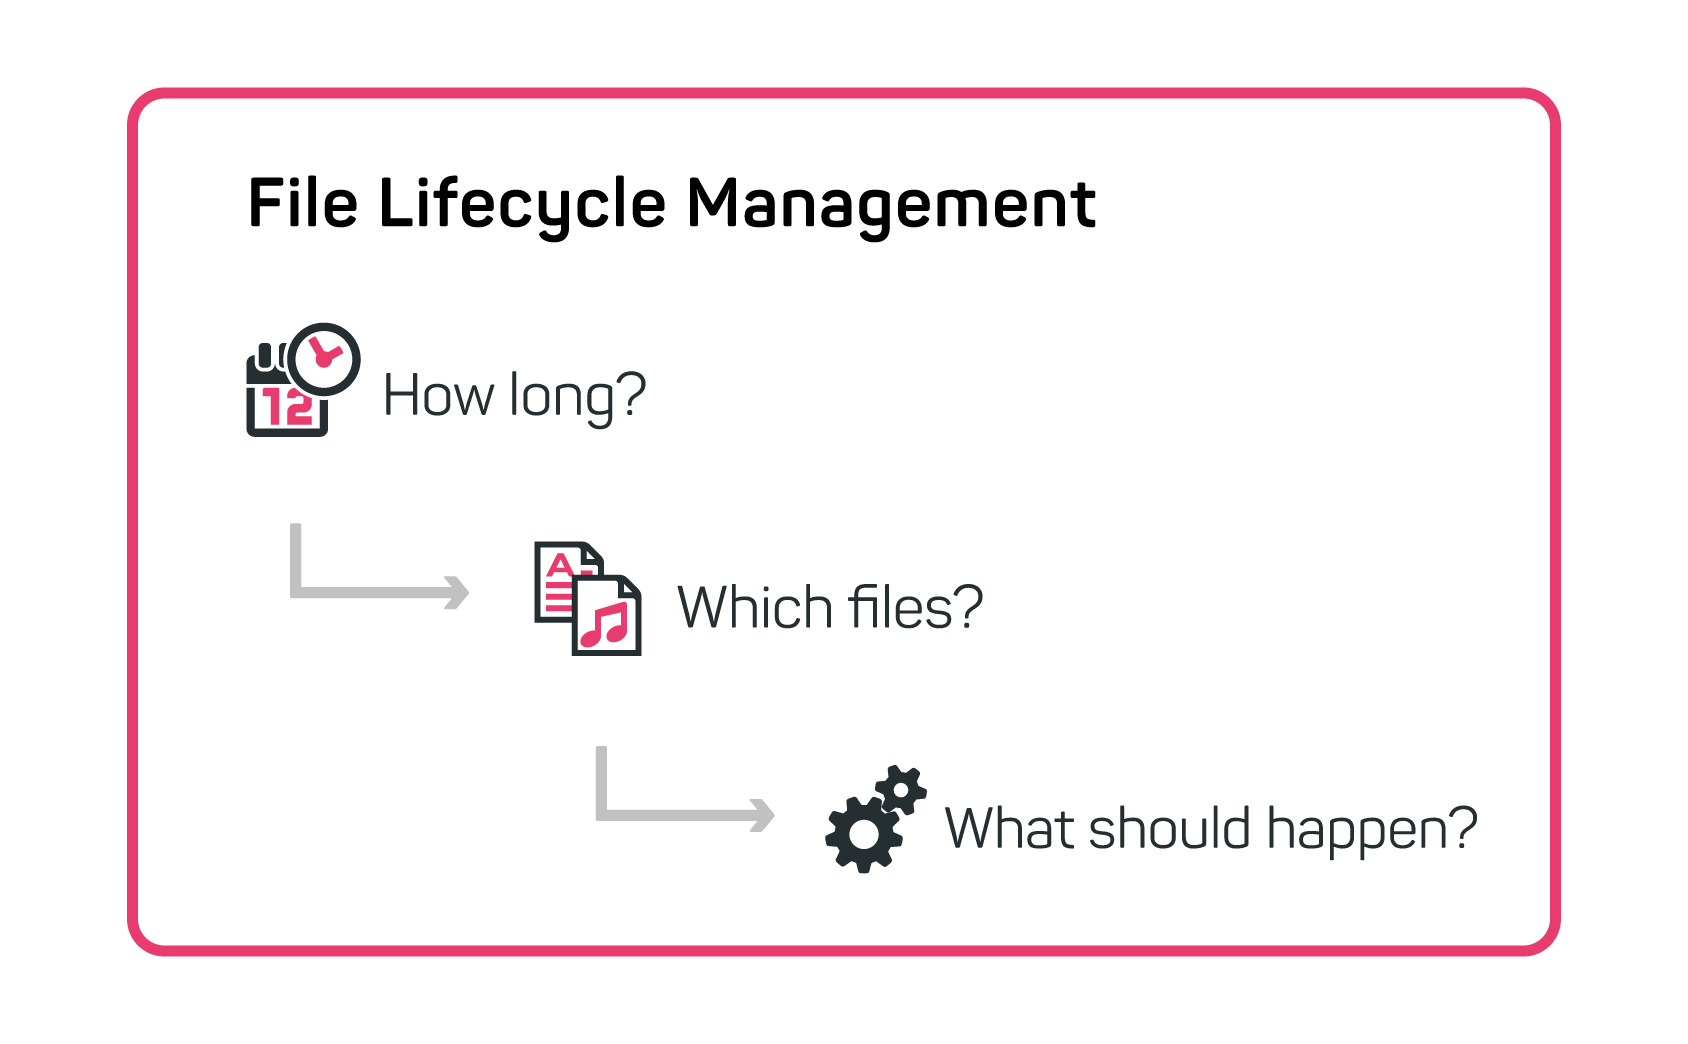 Concept of File Lifecycle Management explained